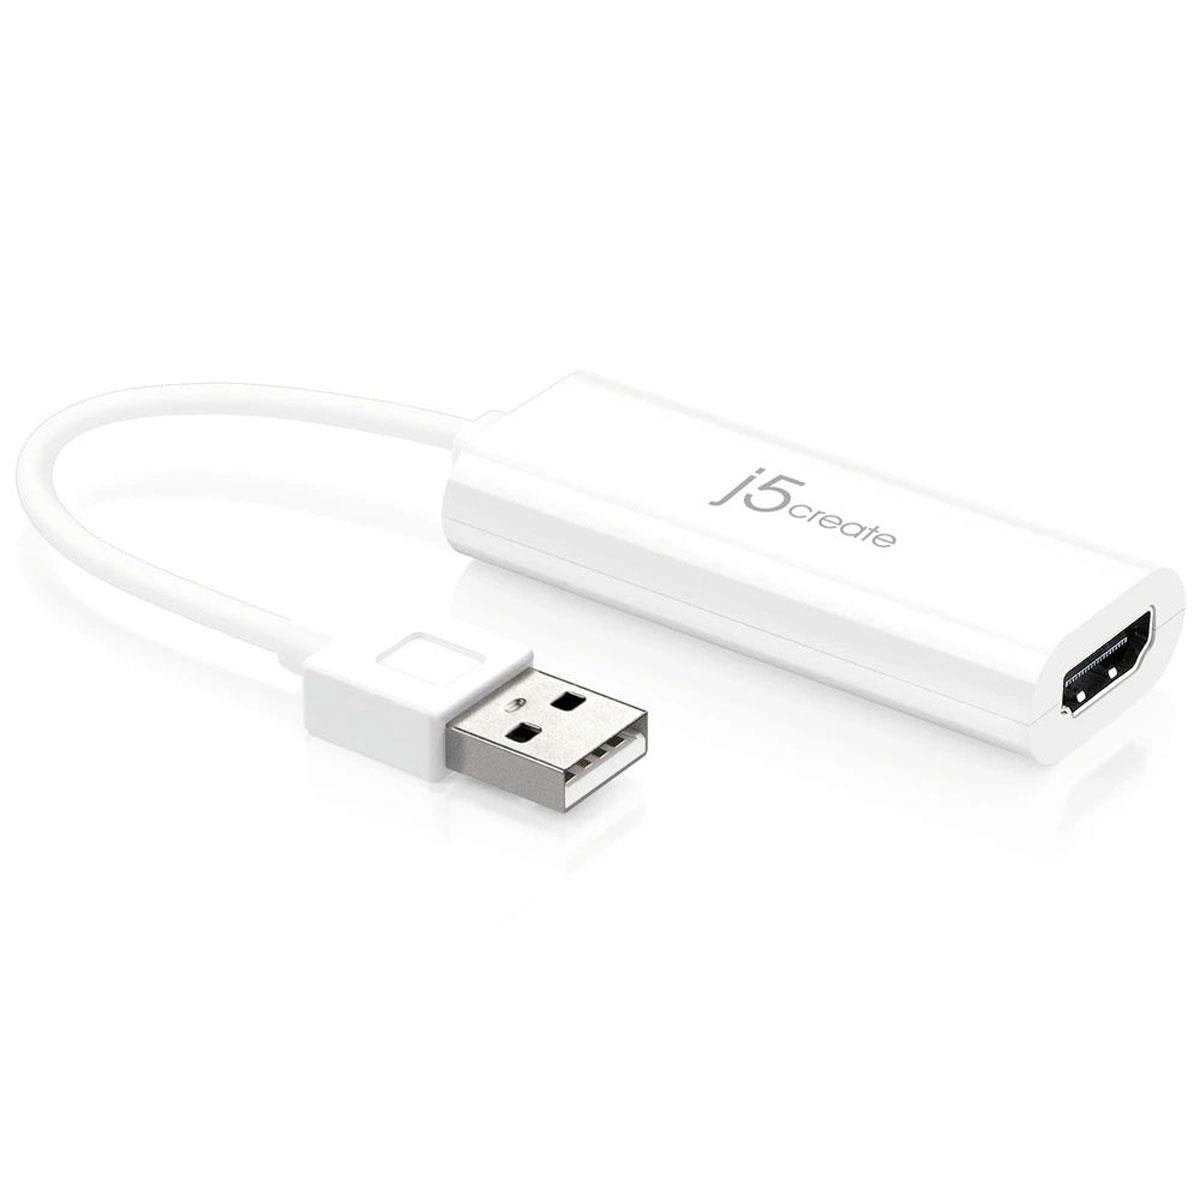 Image of J5 Create USB to HDMI Display Adapter